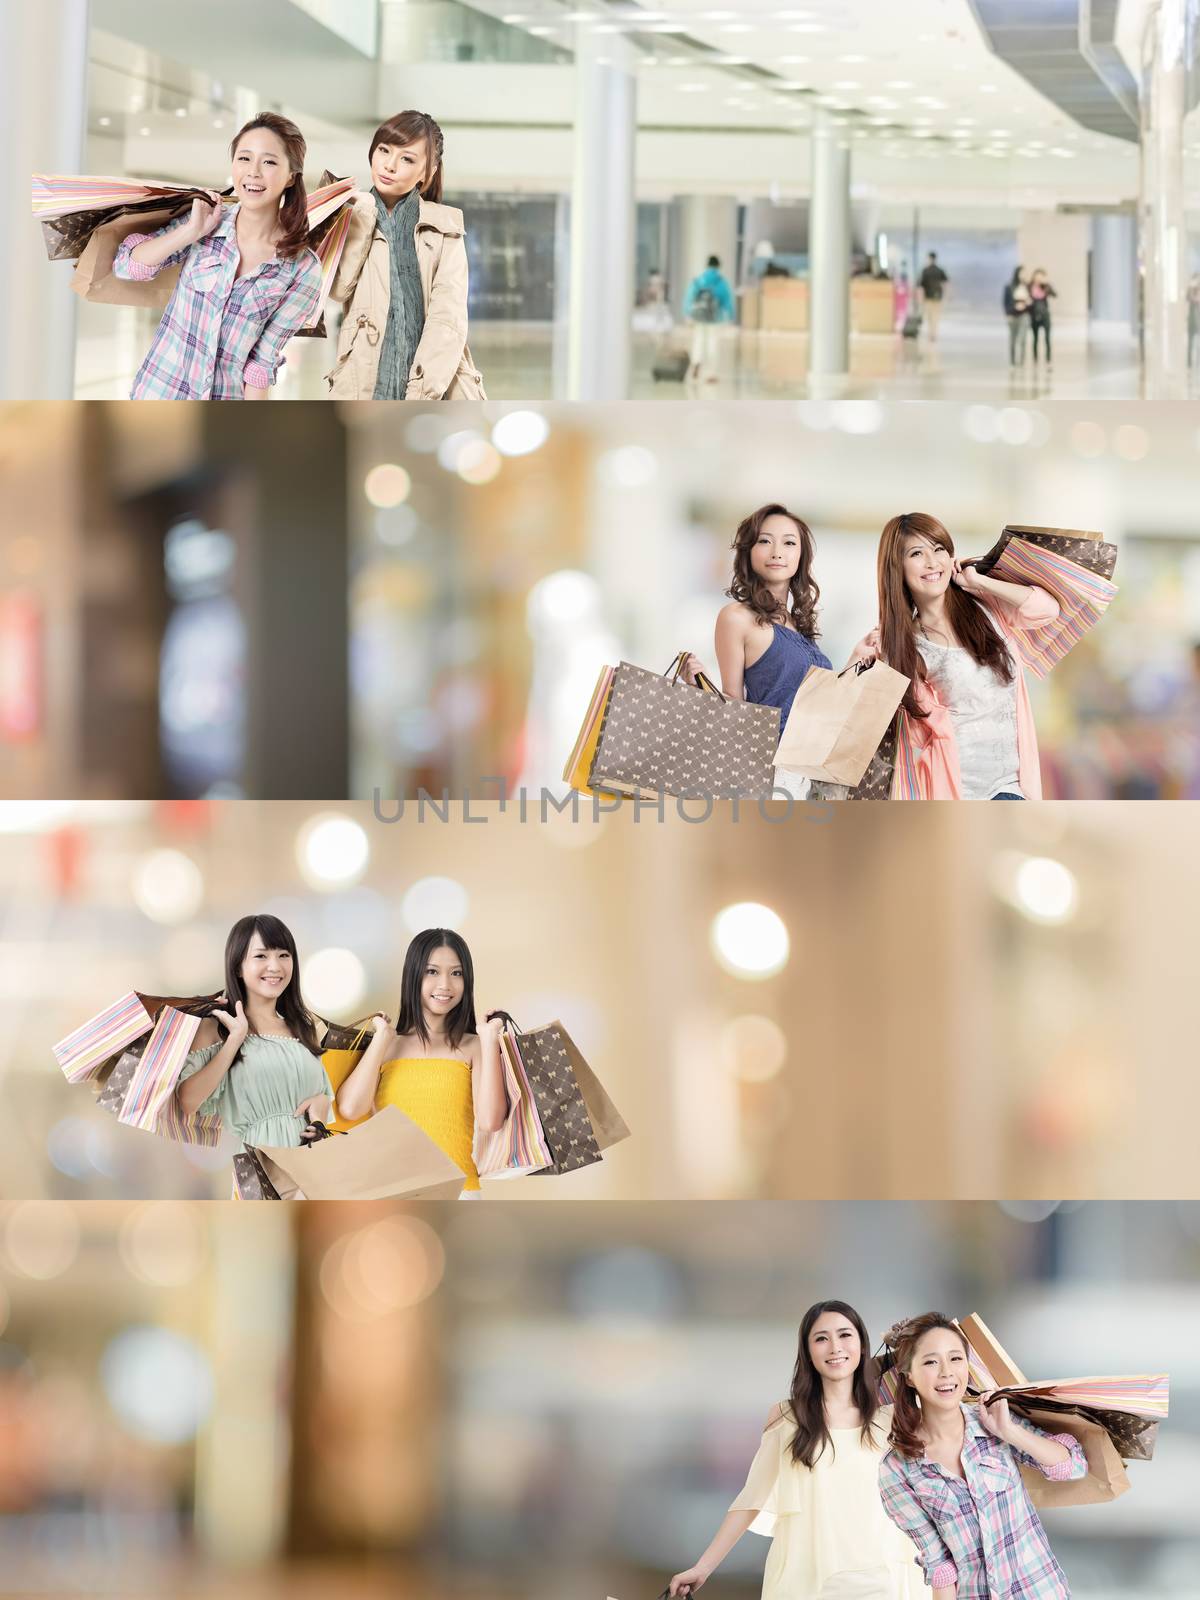 Asian woman shopping, collection from 7 different people, good for web advertisement or the bar.